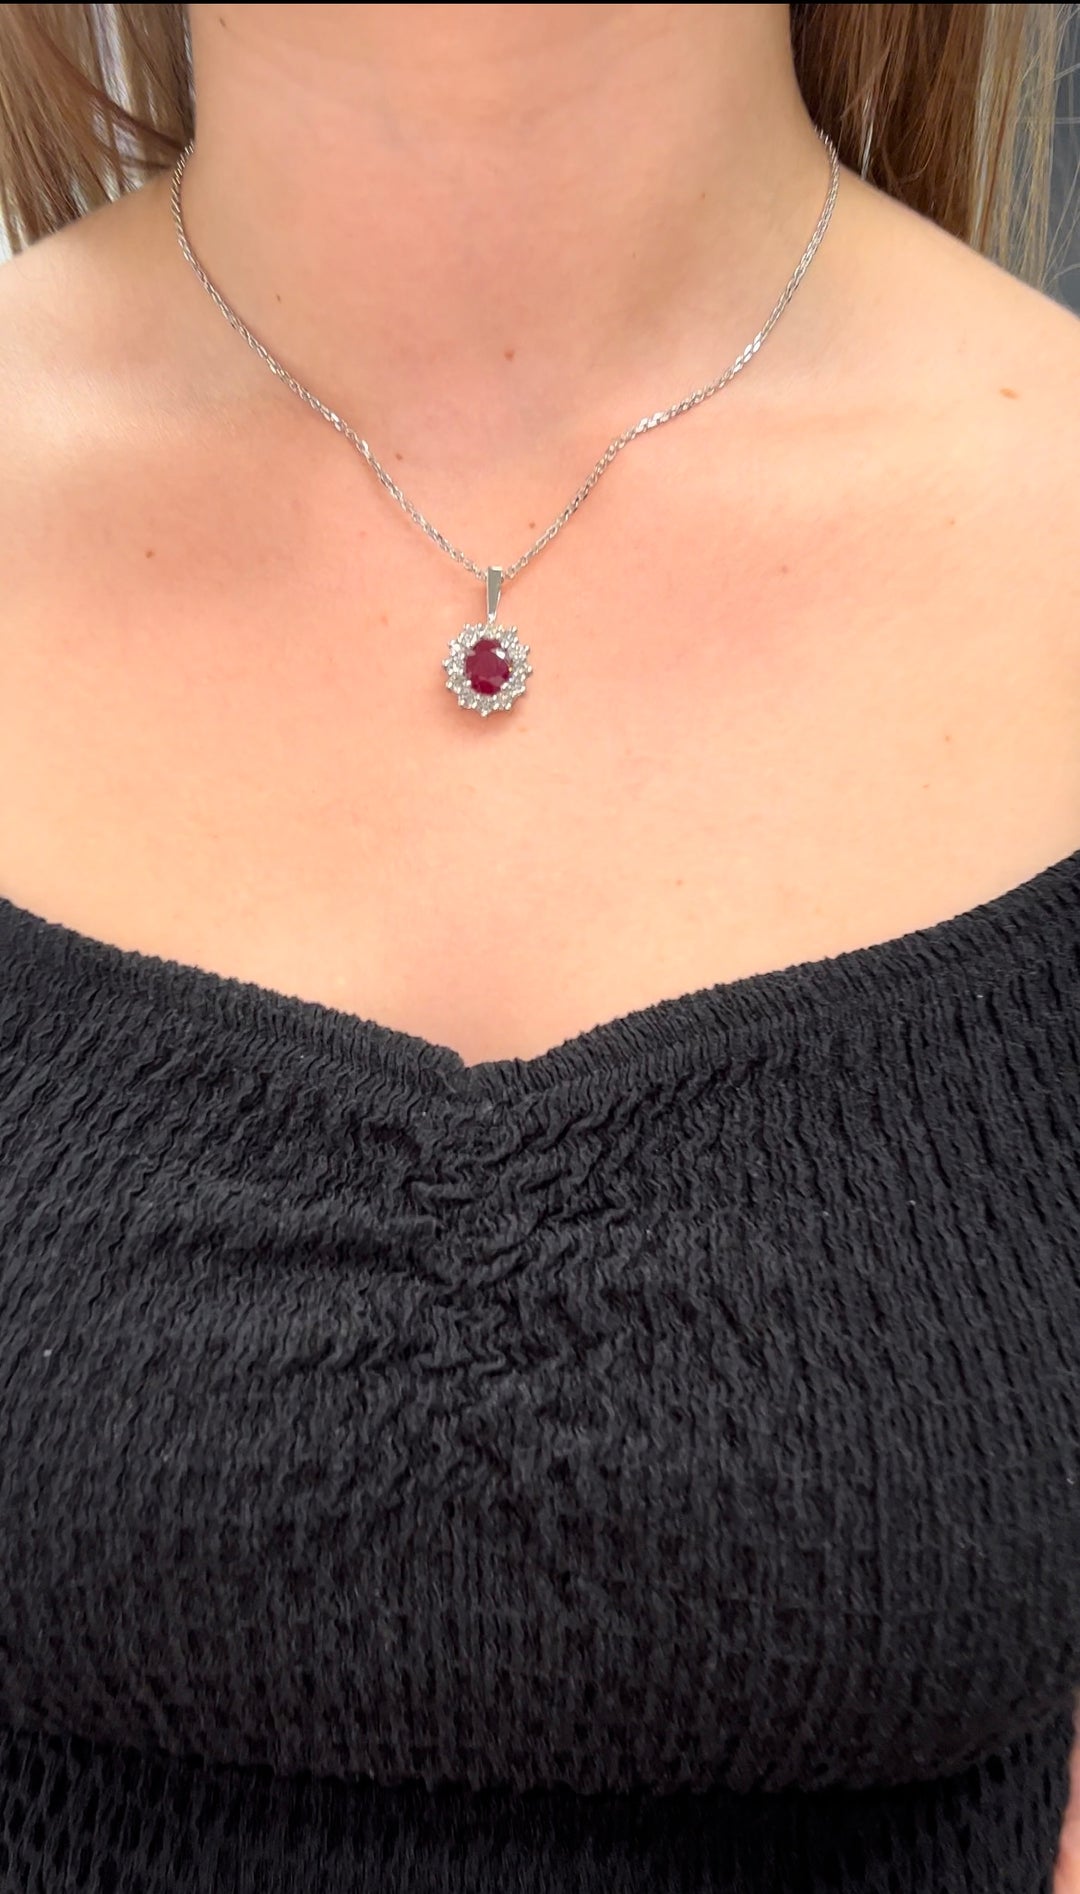 Burma - 3.5CT Oval Ruby and Round Diamond Pendant Necklace